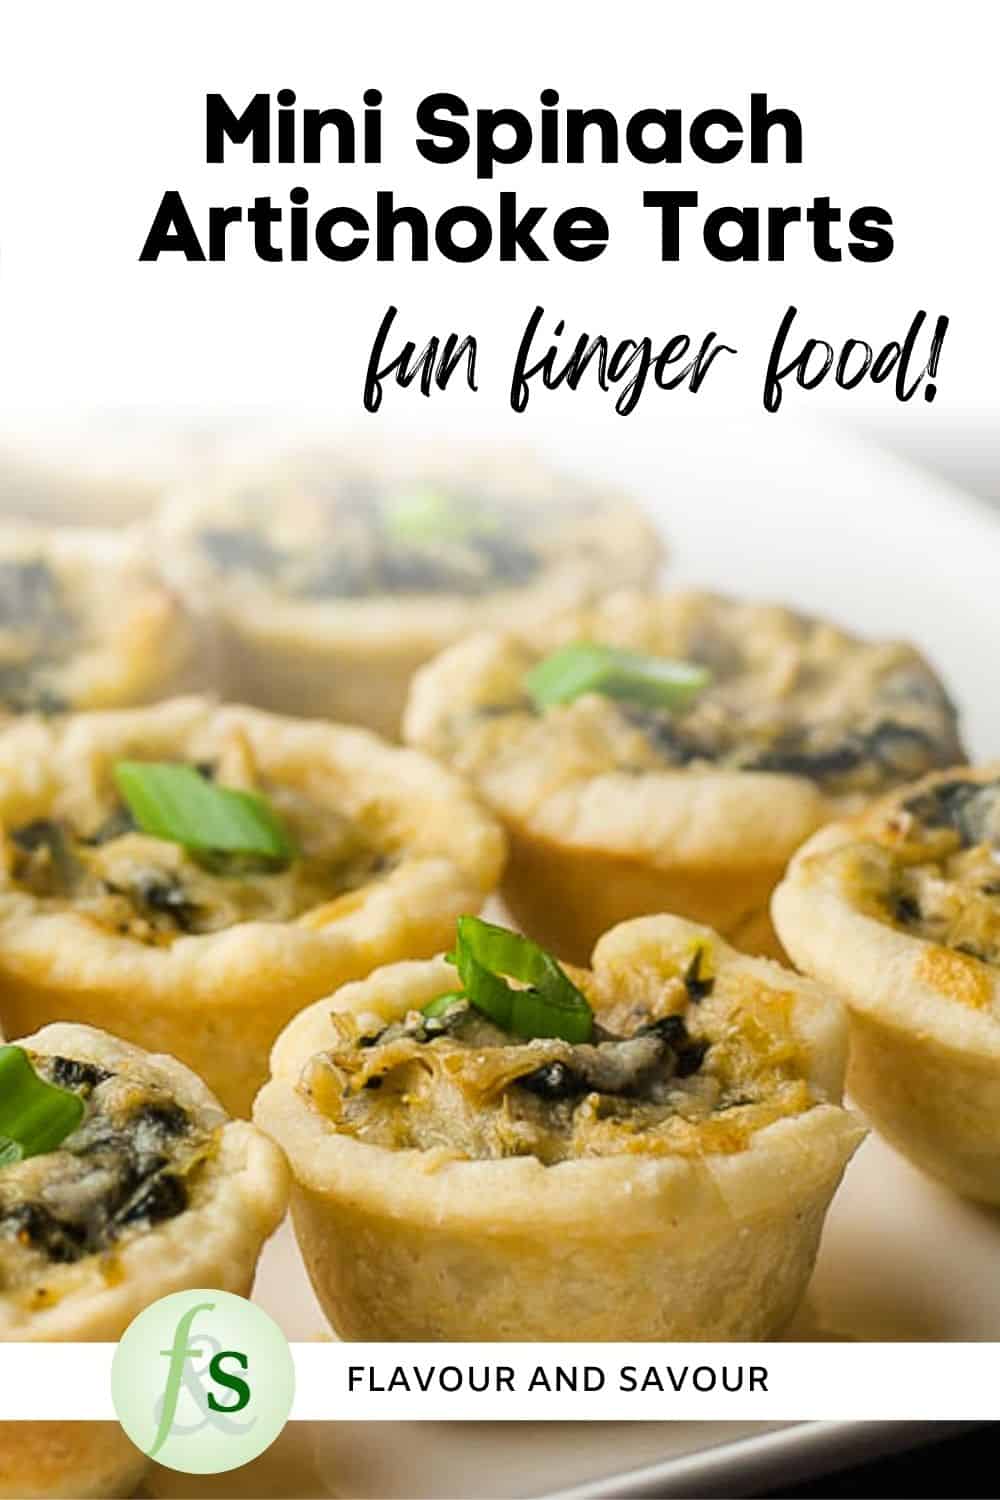 Image with text overlay for Mini Spinach Artichoke Tarts.